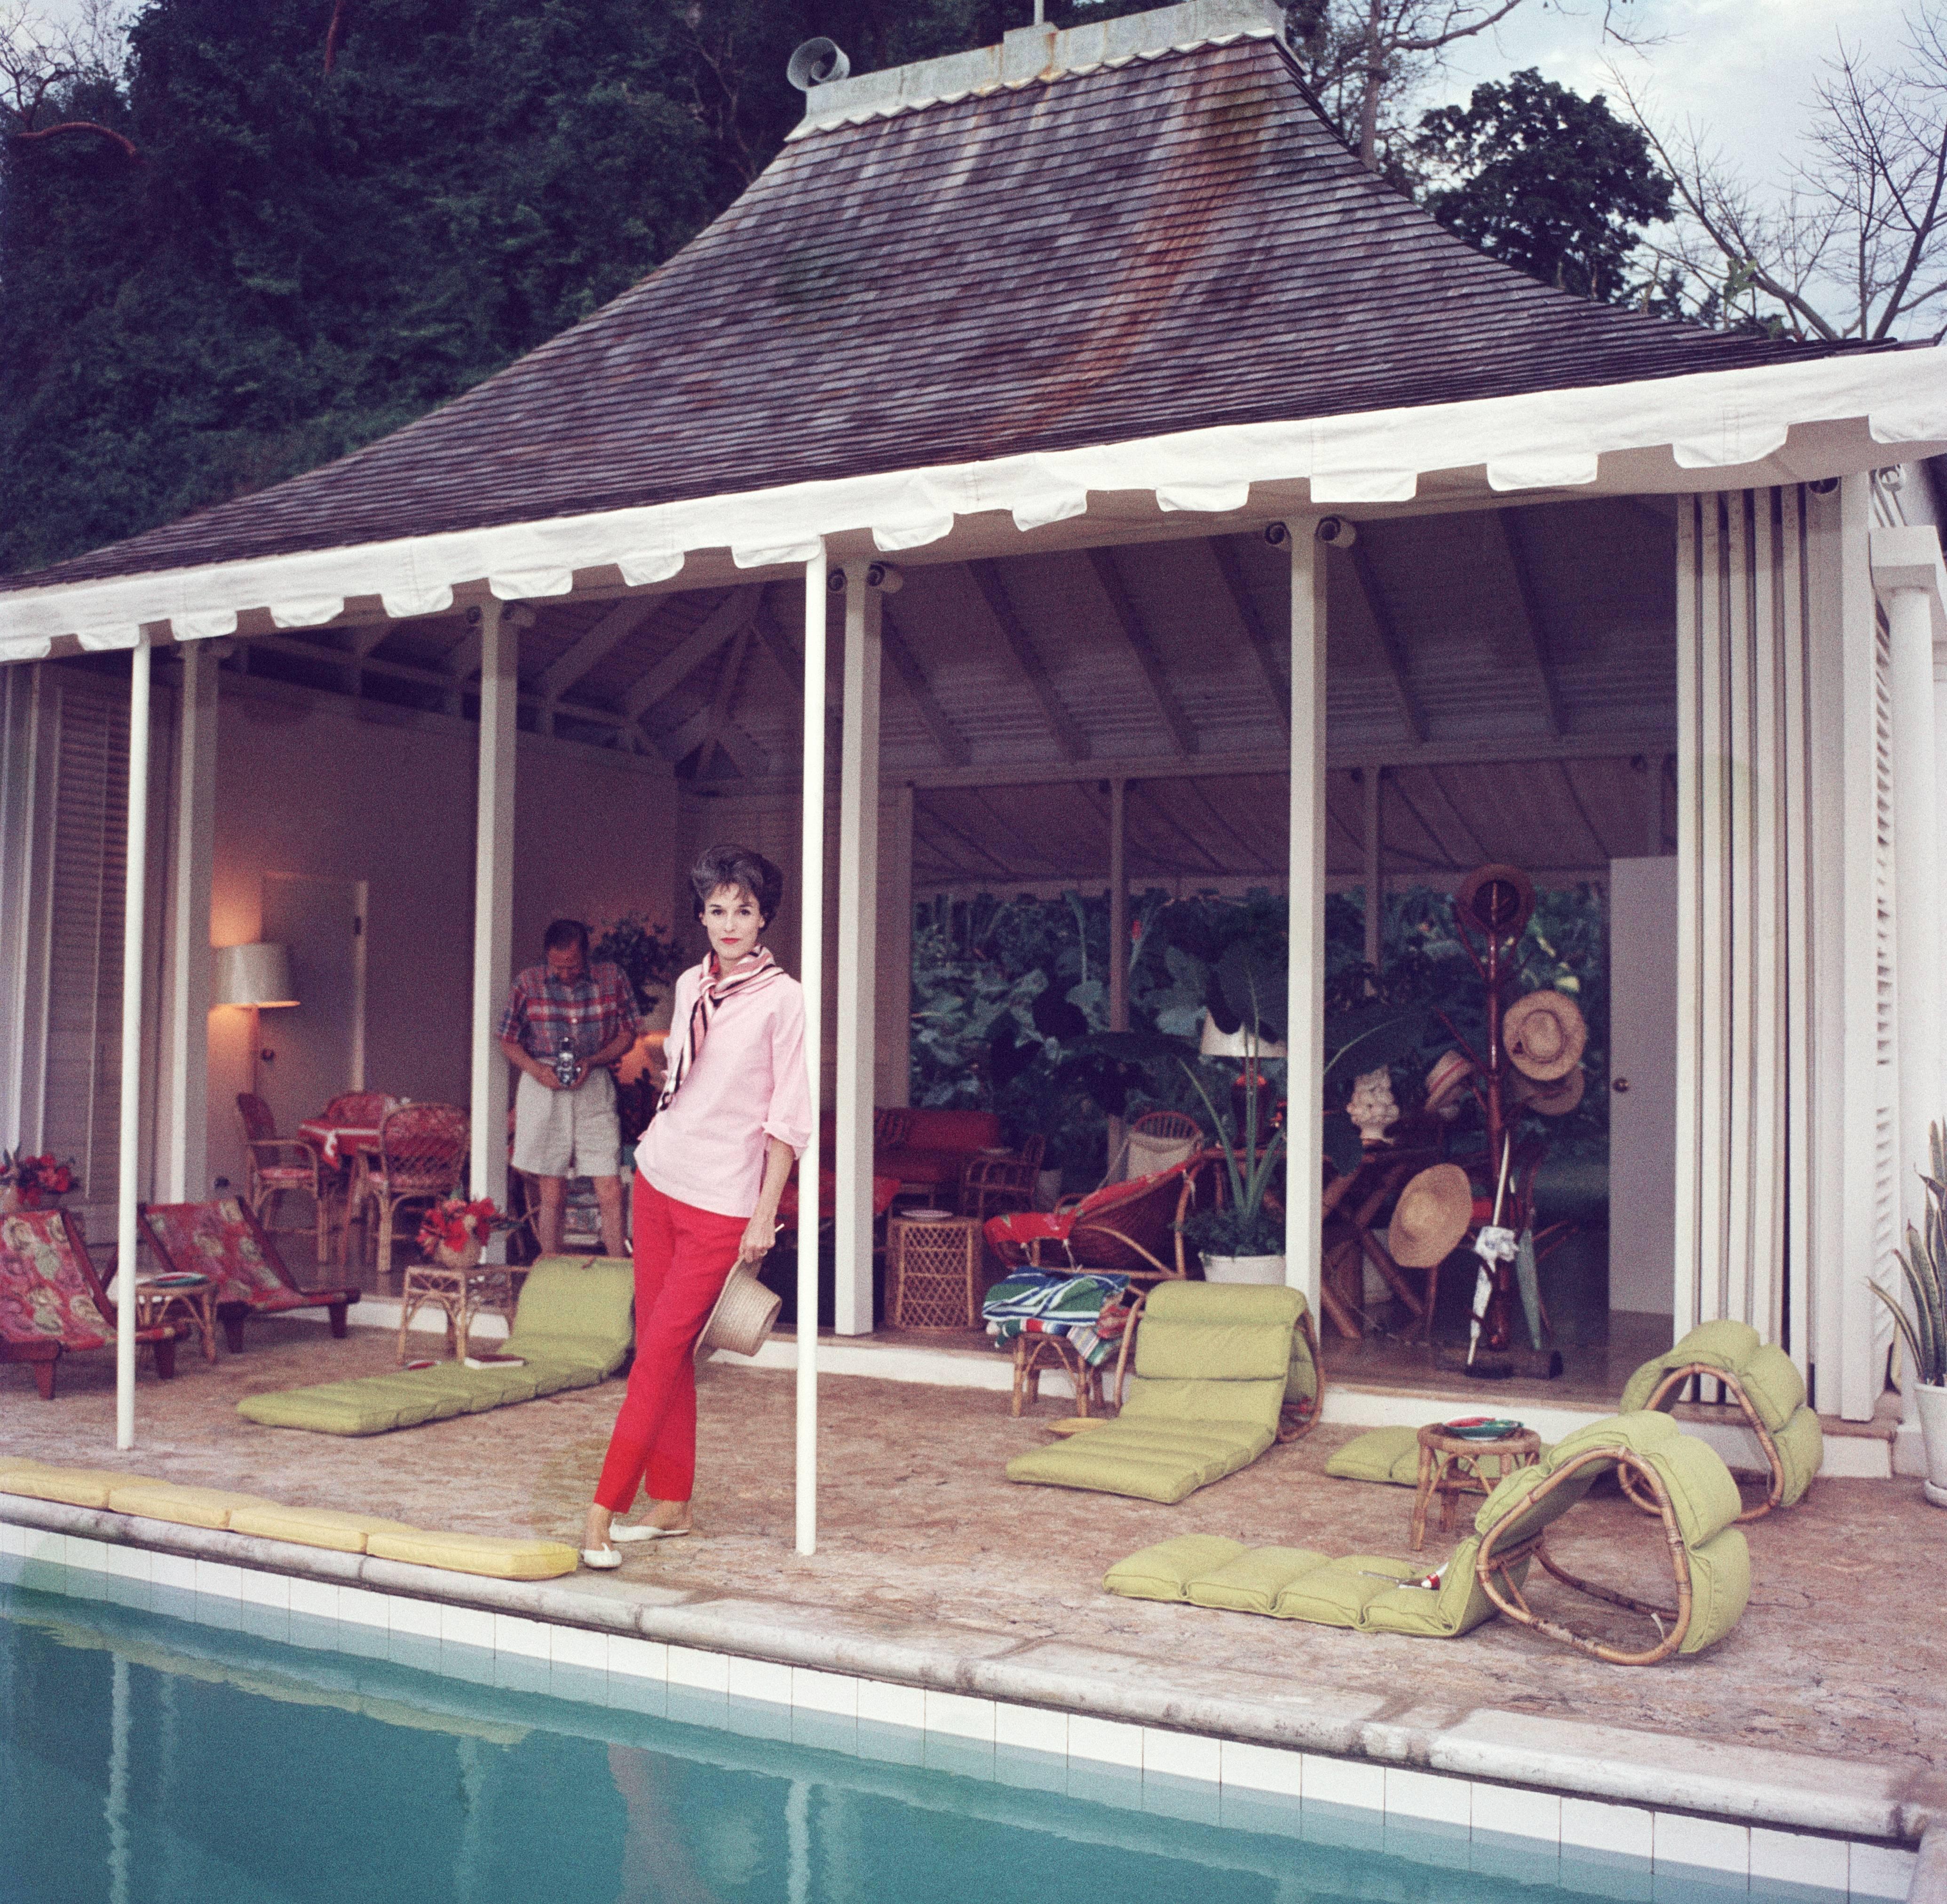 1959: Babe Paley (Mrs William Paley) by the pool. Her husband, William Paley is snapping the photographer at their cottage, Round Hill, Jamaica. A Wonderful Time - Slim Aarons (Photo by Slim Aarons/Getty Images)

C-type print from the original